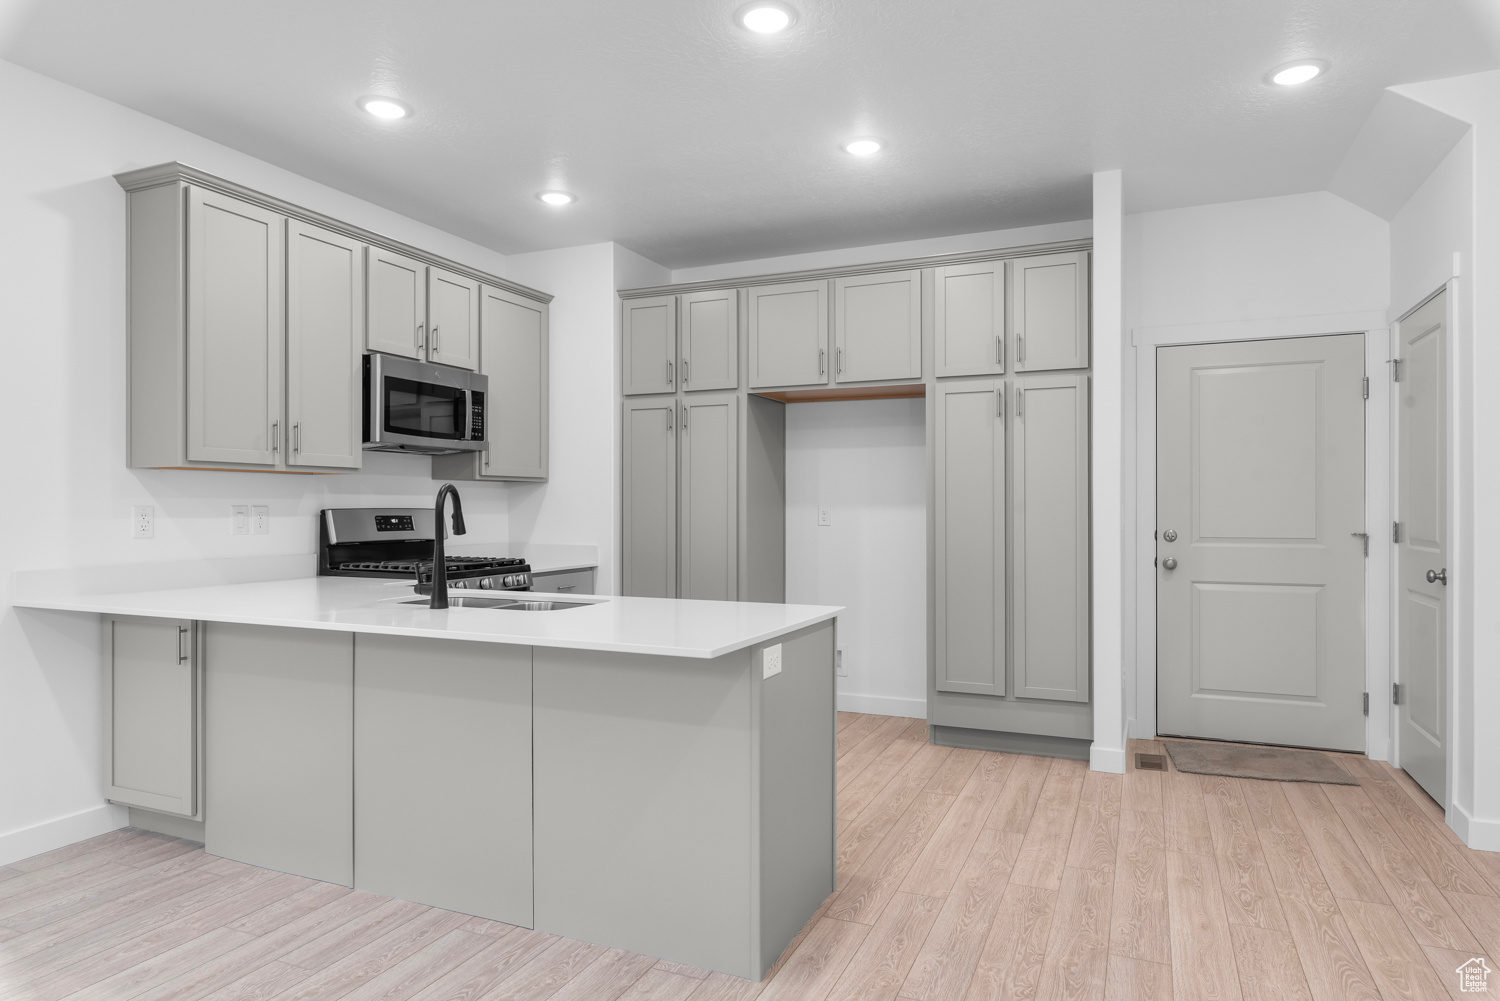 Kitchen featuring gray cabinets, stainless steel appliances, light hardwood / wood-style floors, and kitchen peninsula